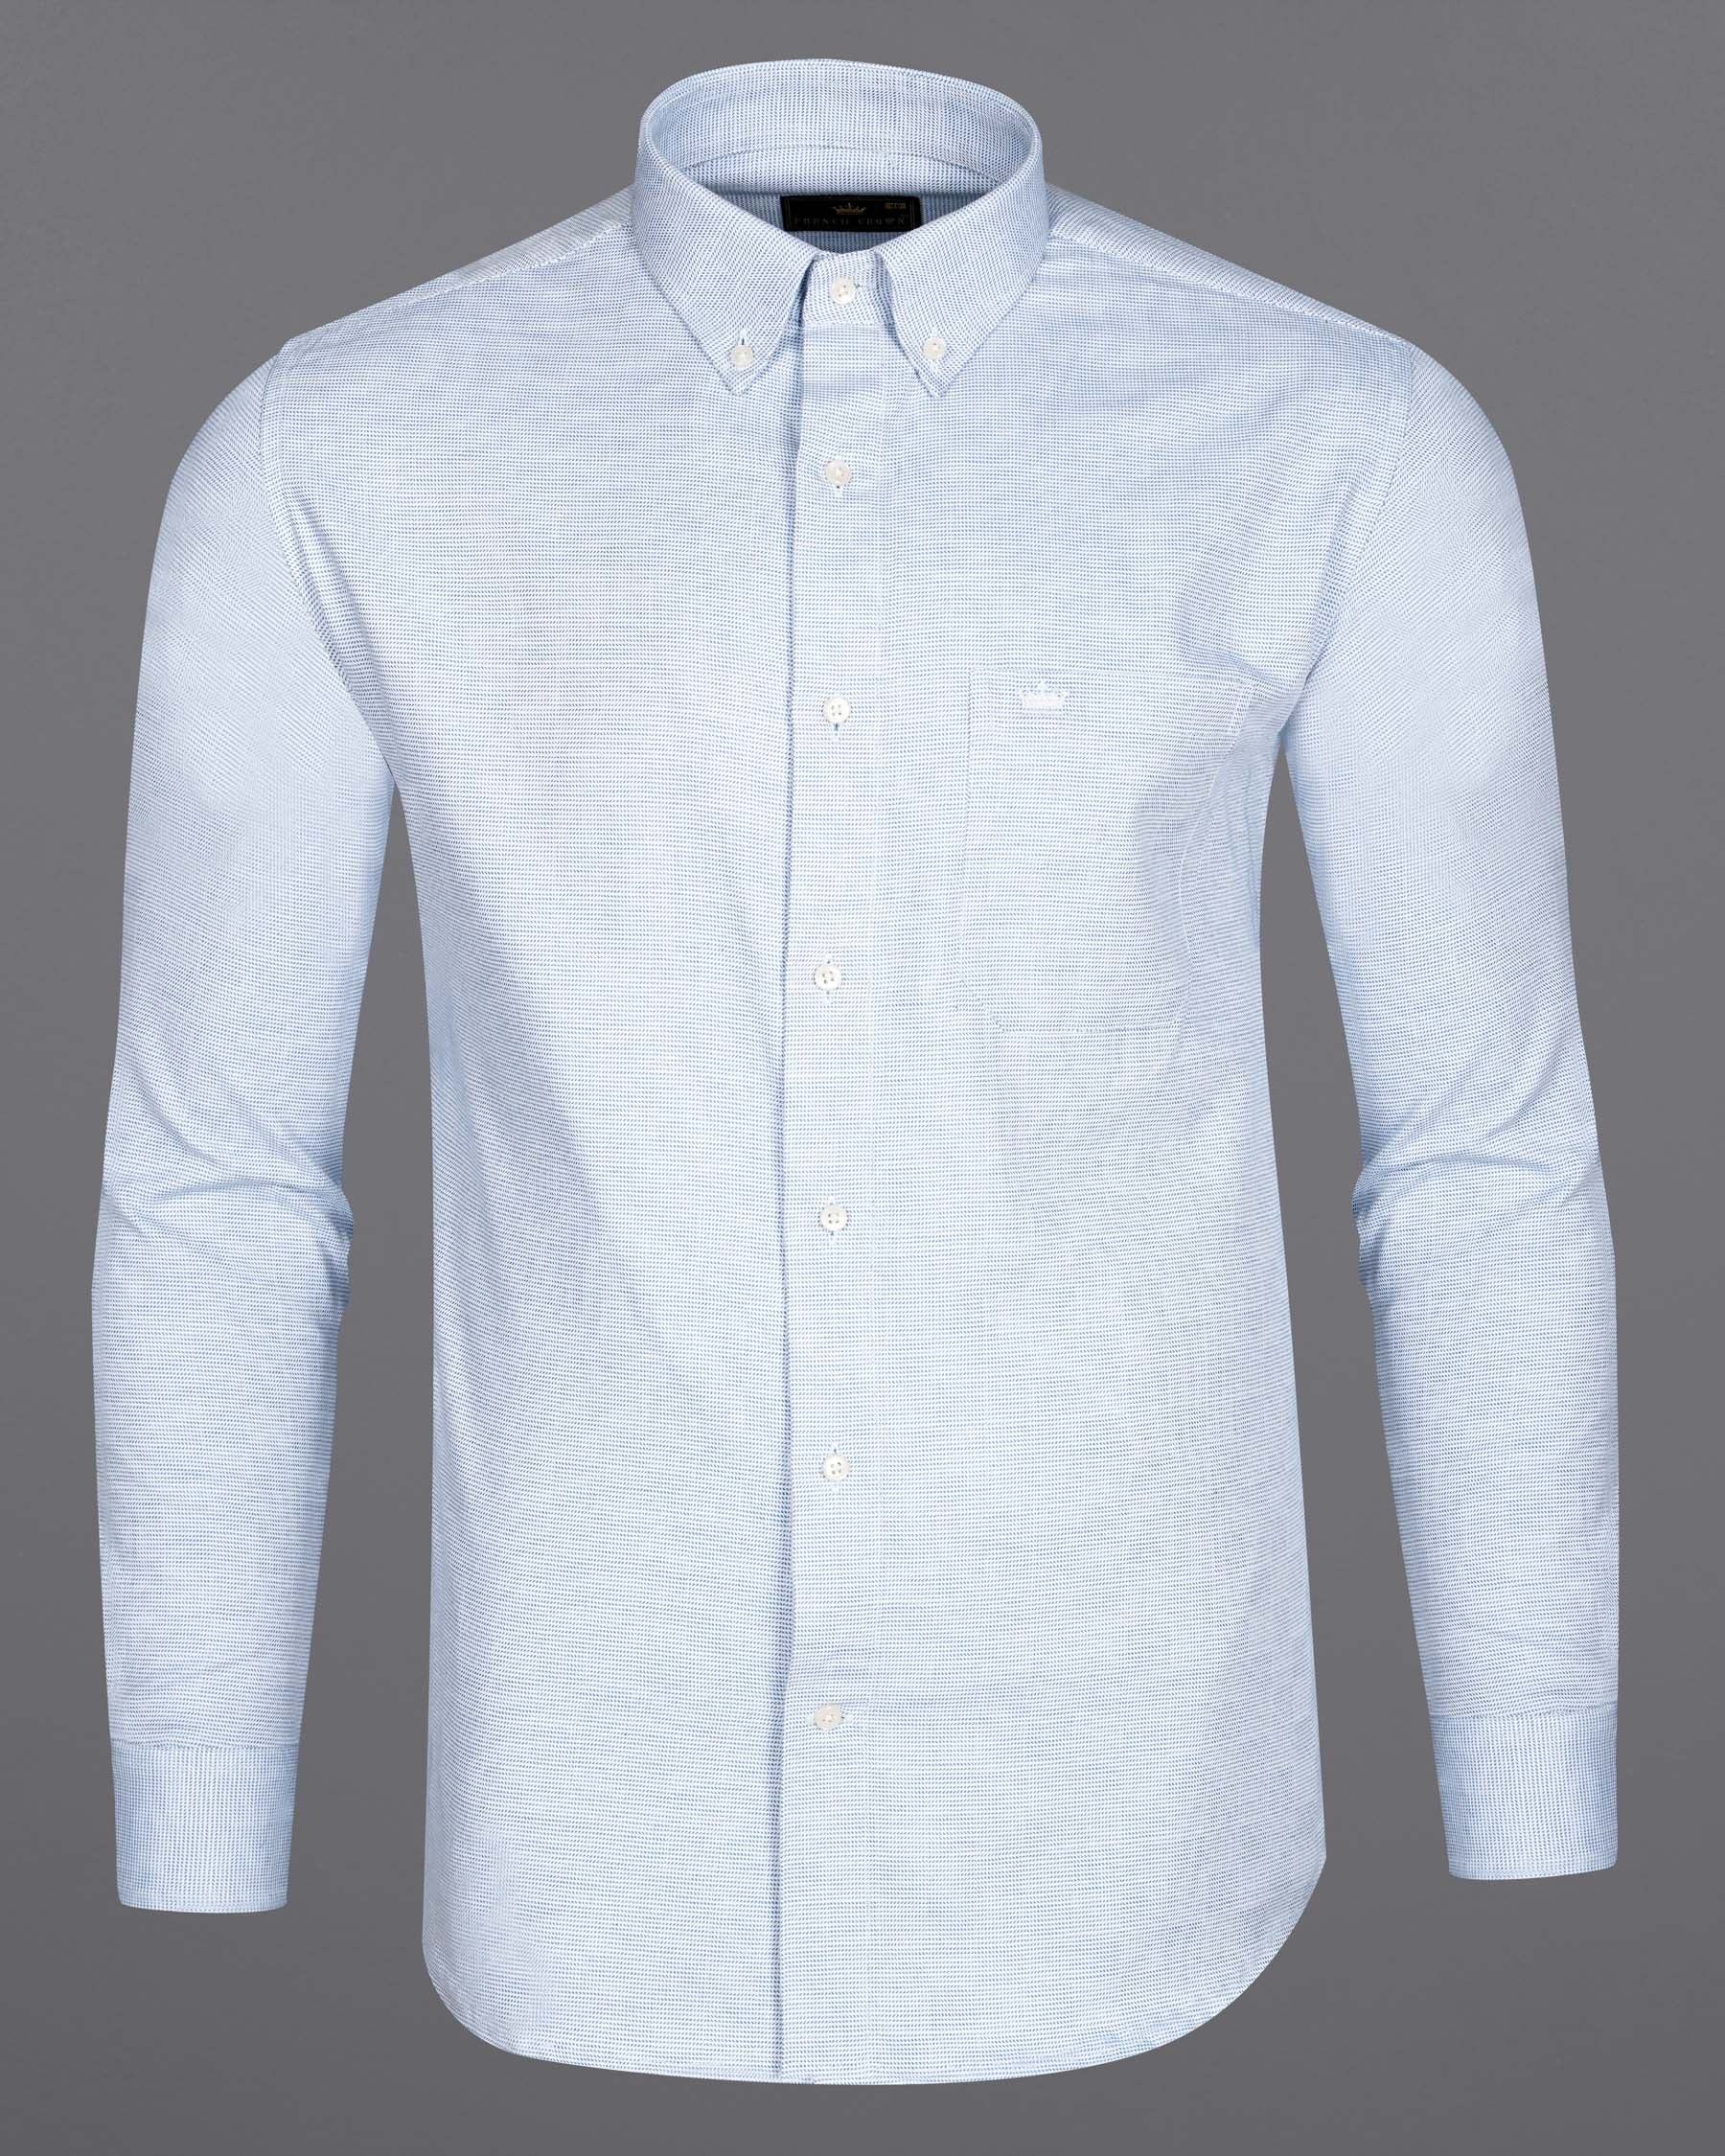 Ship Cove Blue and White Dobby Textured Premium Giza Cotton Shirt 7956-BD-38, 7956-BD-H-38, 7956-BD-39, 7956-BD-H-39, 7956-BD-40, 7956-BD-H-40, 7956-BD-42, 7956-BD-H-42, 7956-BD-44, 7956-BD-H-44, 7956-BD-46, 7956-BD-H-46, 7956-BD-48, 7956-BD-H-48, 7956-BD-50, 7956-BD-H-50, 7956-BD-52, 7956-BD-H-52